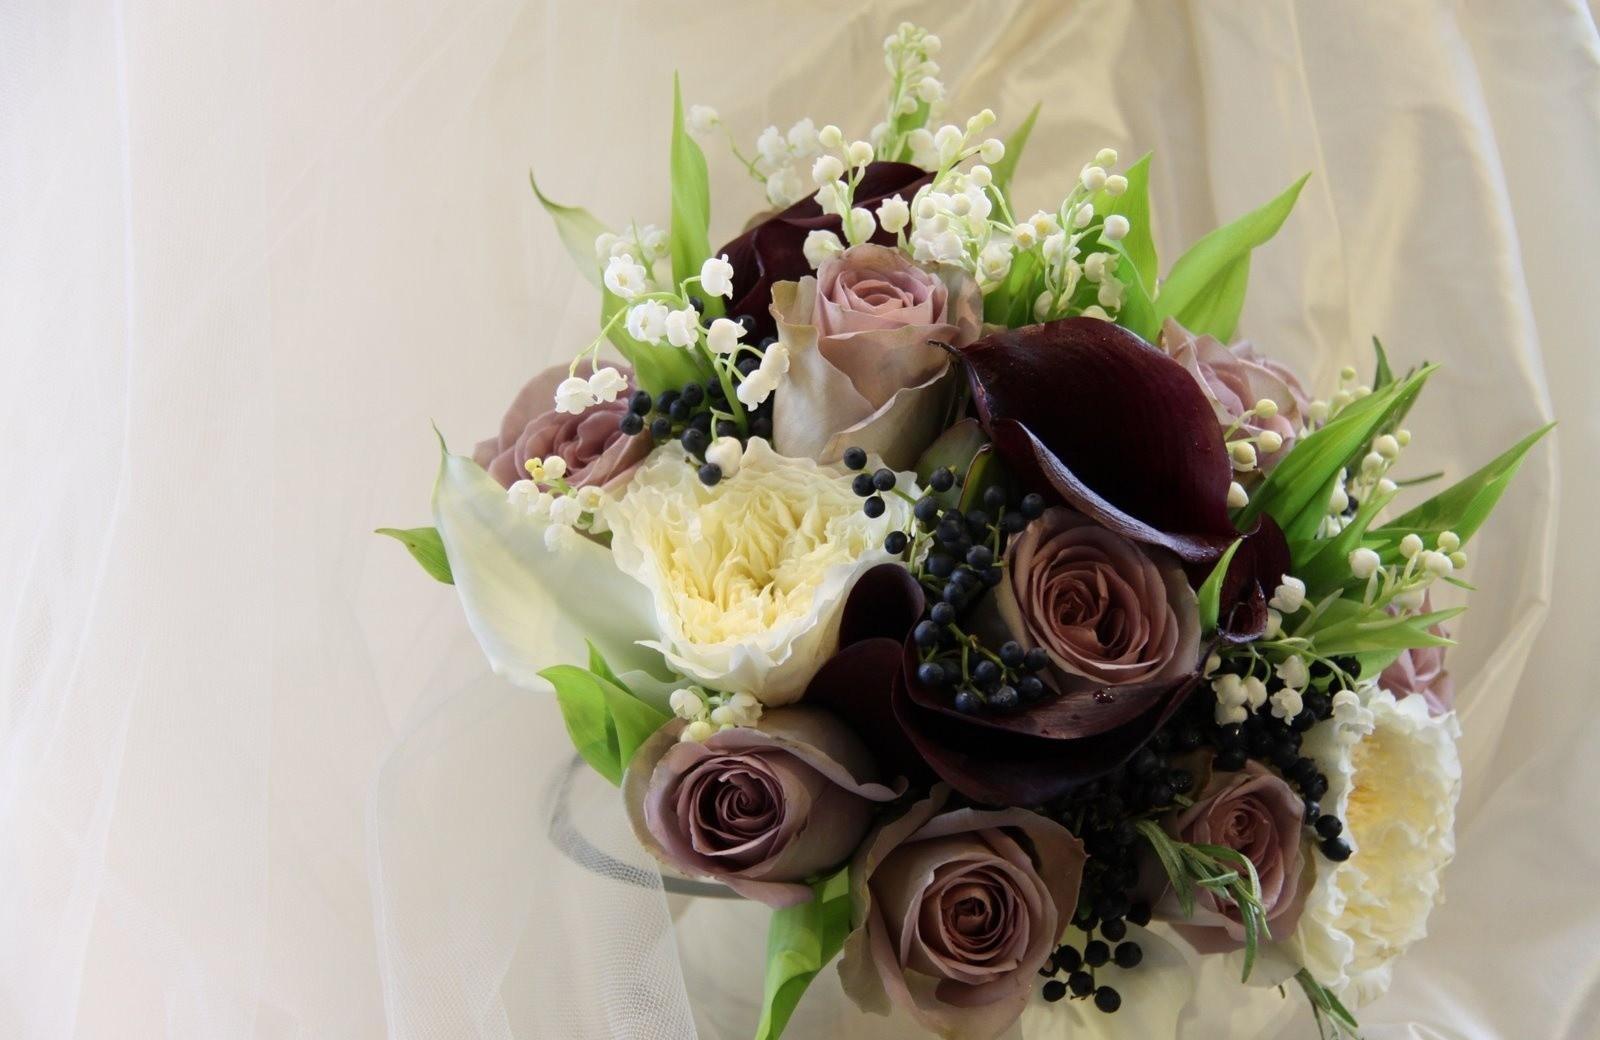 Free HD composition, flowers, roses, lily of the valley, bouquet, berry